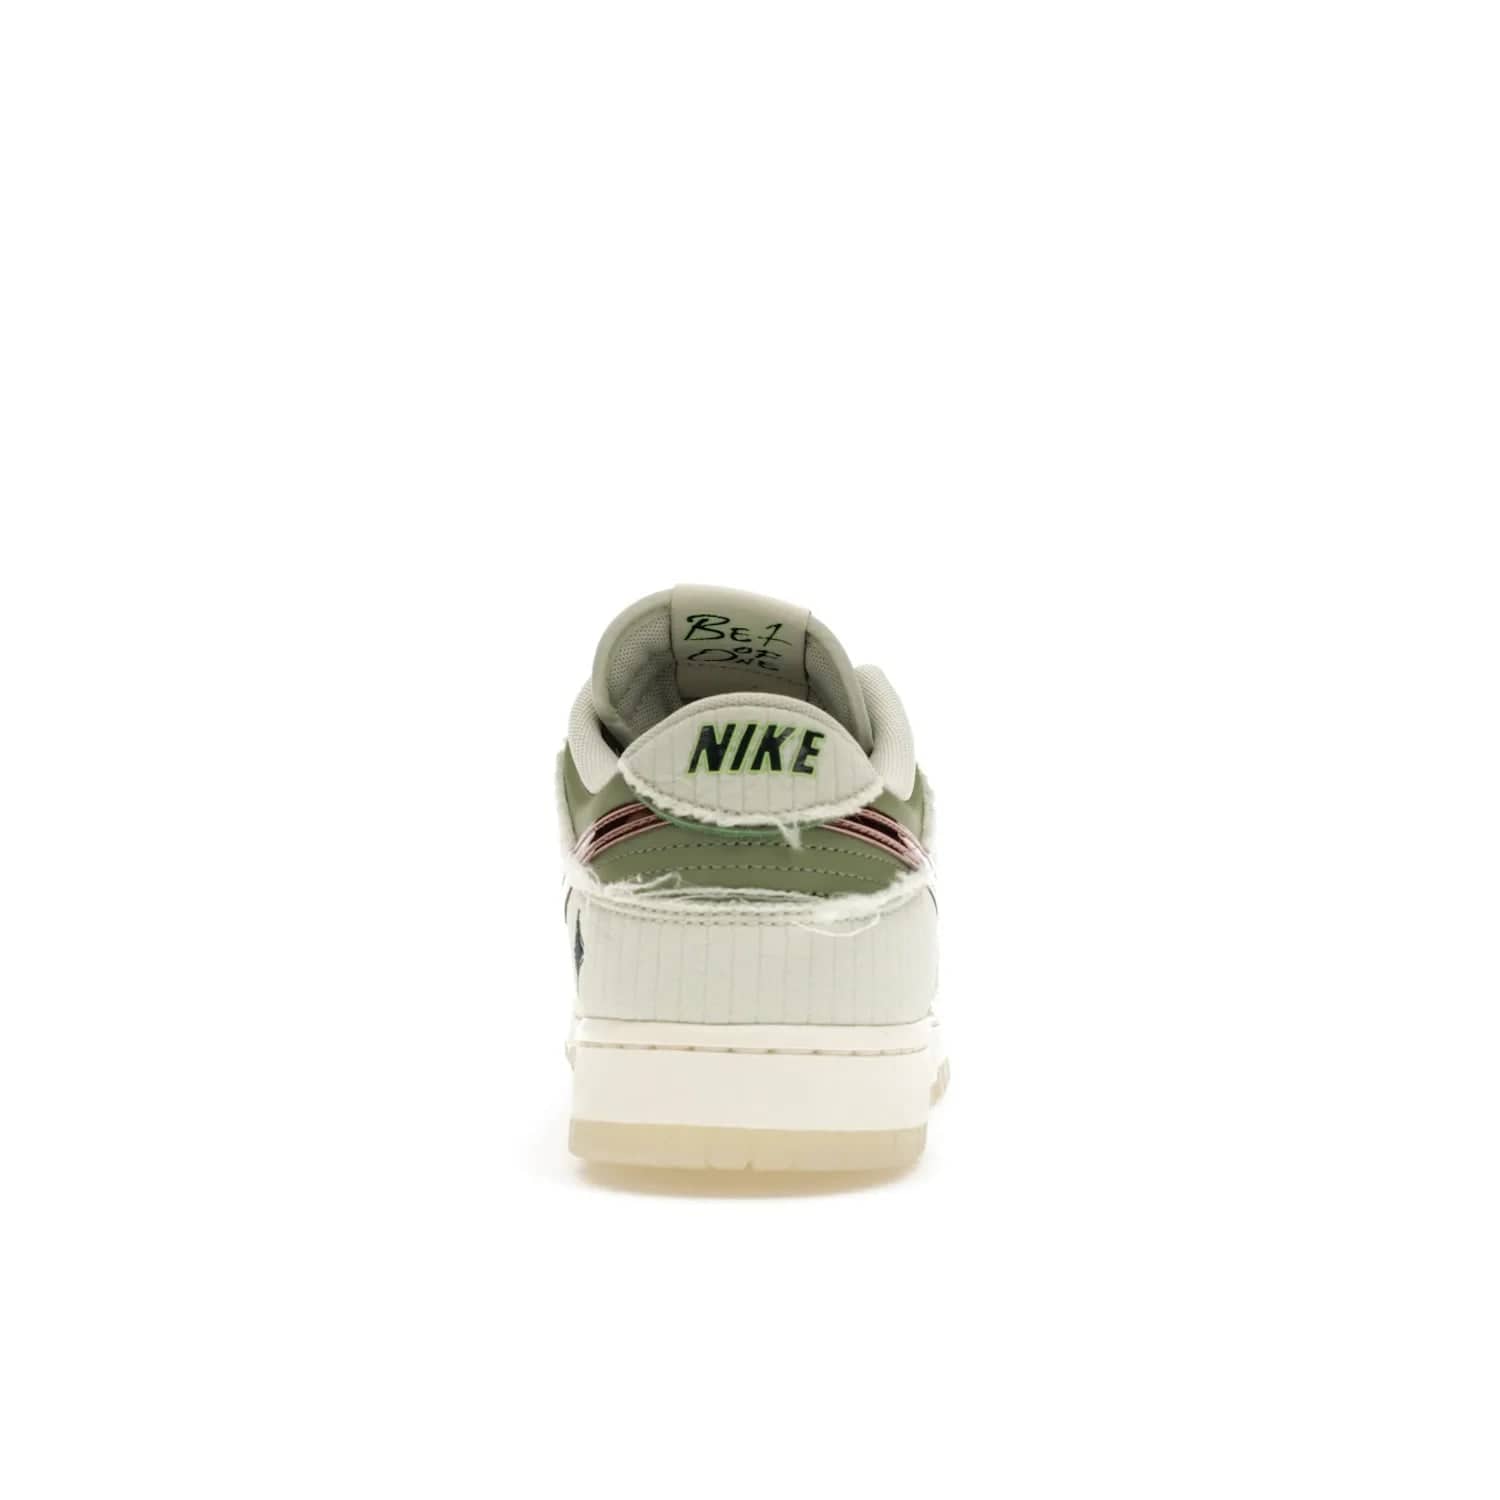 Nike Dunk Low Retro PRM Kyler Murray Be 1 of One - Image 28 - Only at www.BallersClubKickz.com - Introducing the Nike Dunk Low Retro PRM Kyler Murray "Be 1 of One"! A Sea Glass upper with Sail and Oil Green accents, finished with Rose Gold accents. Drop date: November 10th.